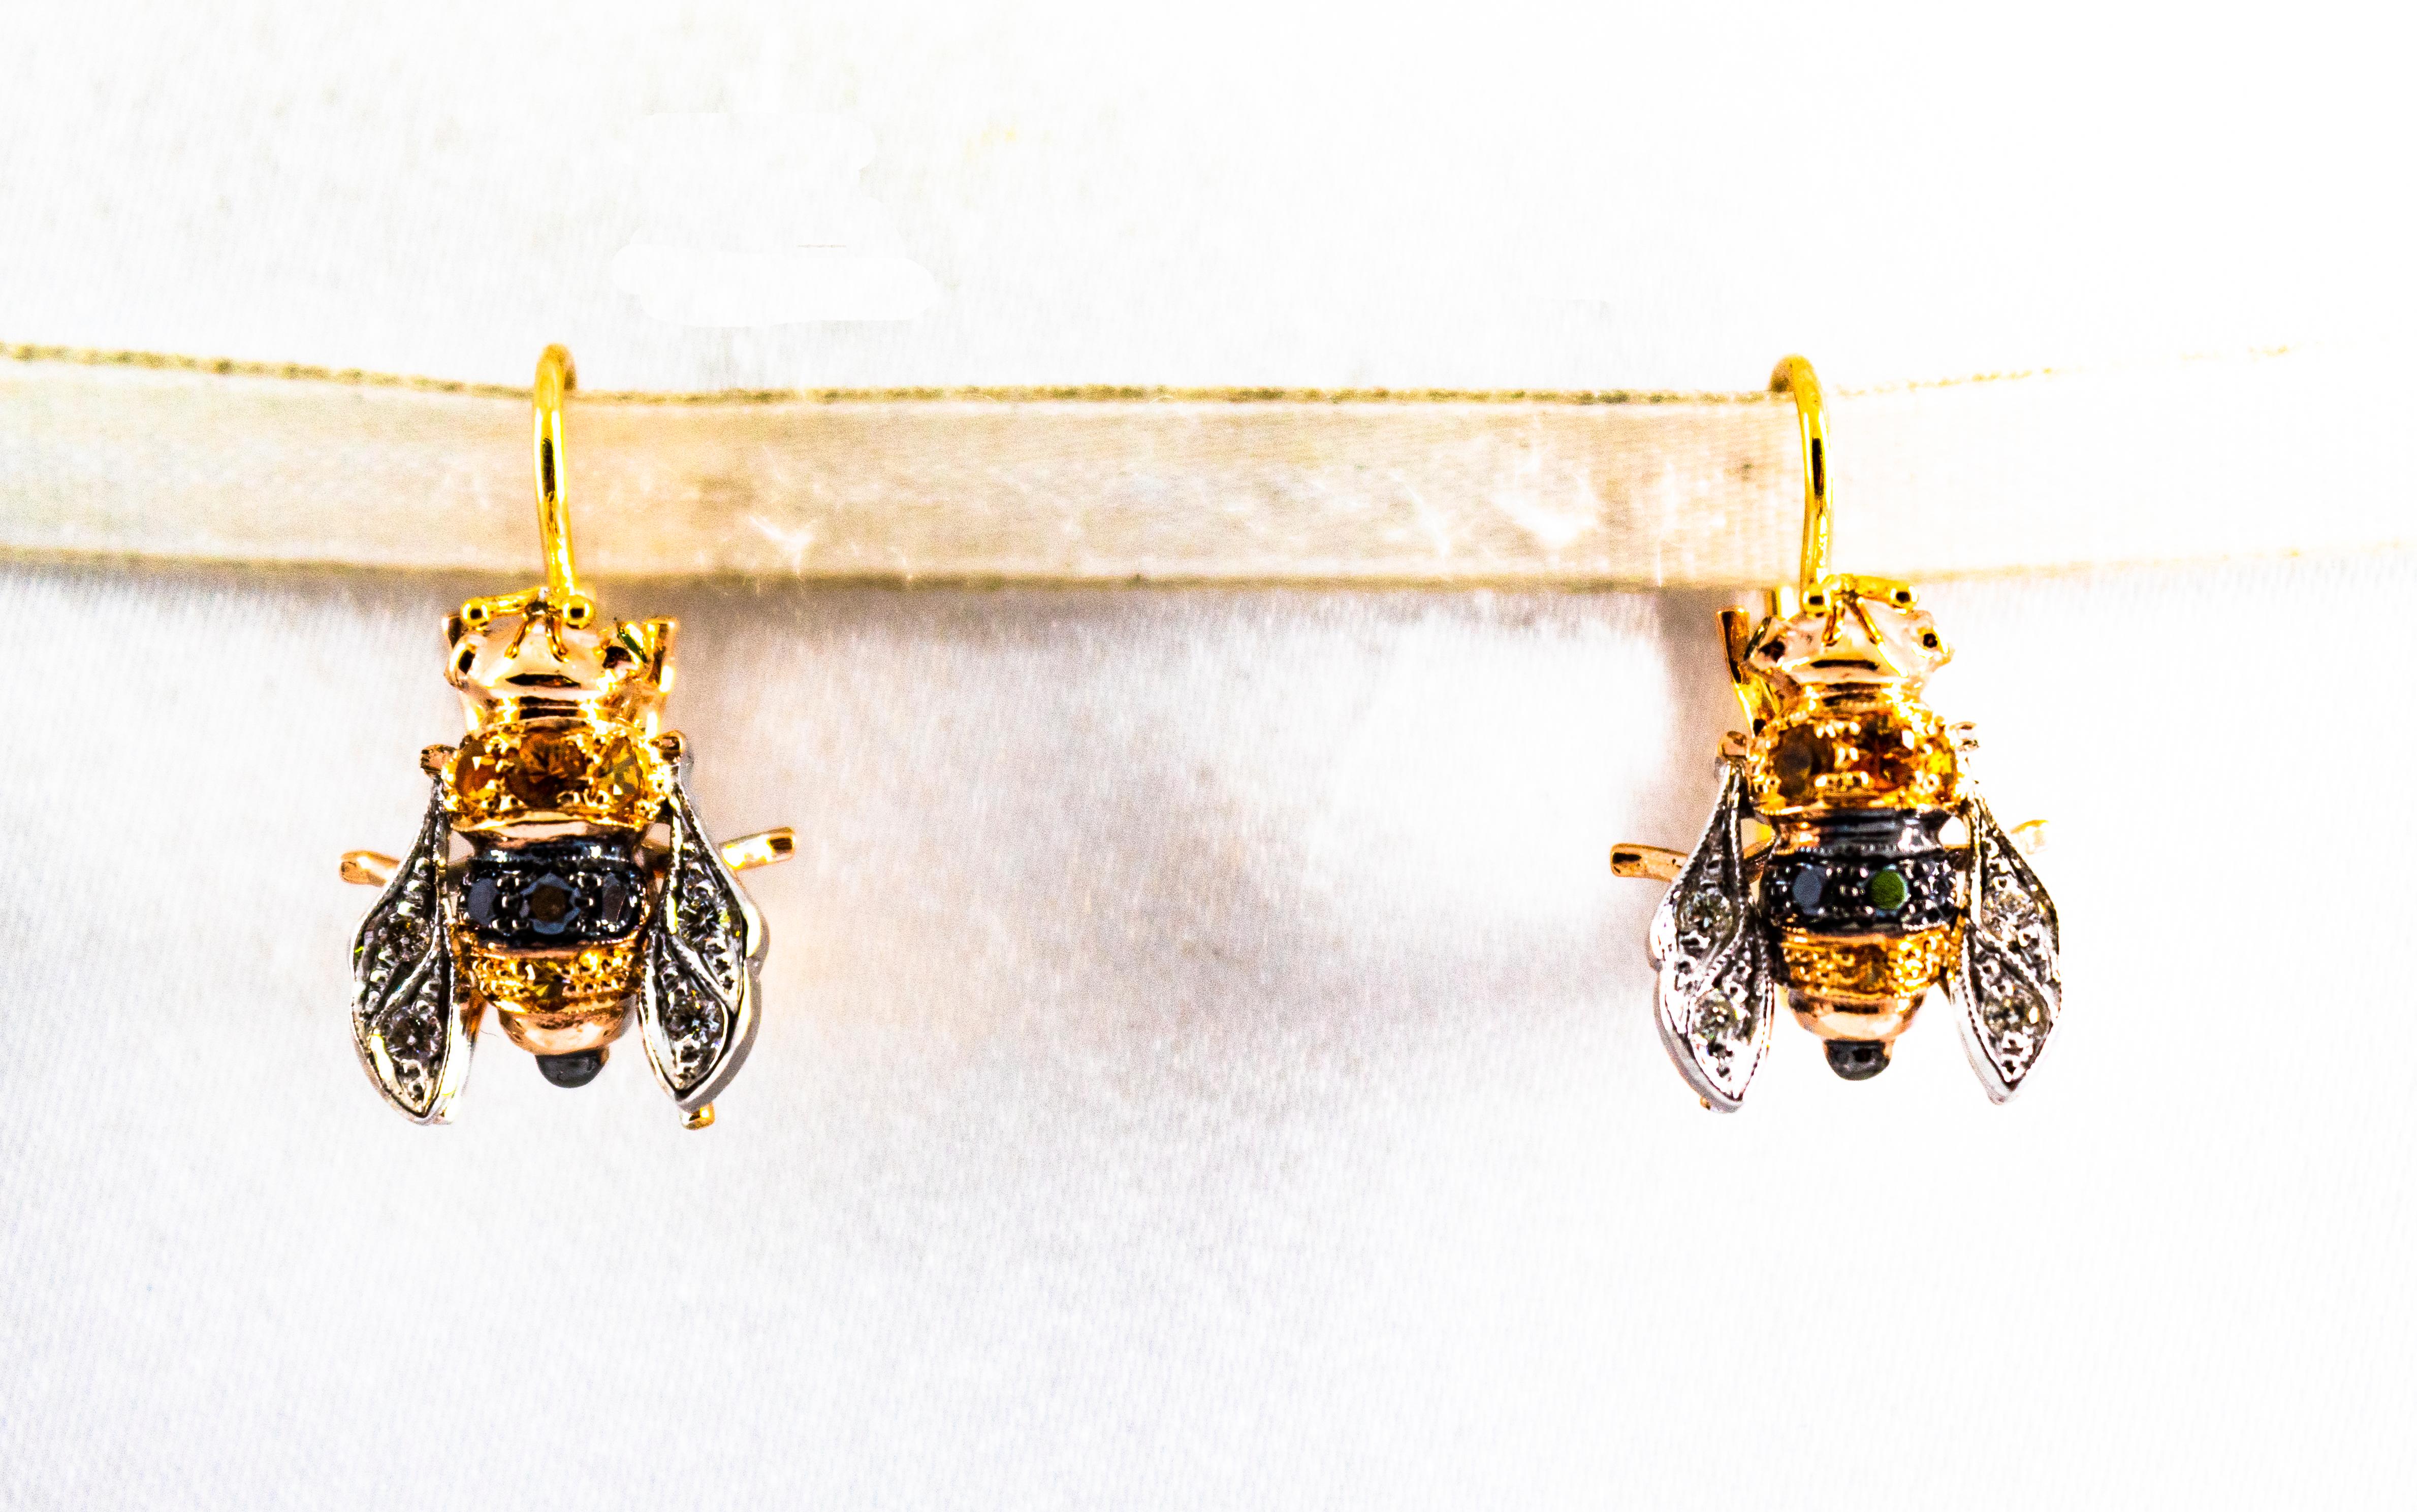 These Earrings are made of 9K Yellow Gold and Sterling Silver.
These Earrings have 0.16 Carats of White Brilliant Cut Diamonds.
These Earrings have 0.14 Carats of Black Diamonds.
These Earrings have 0.35 Carats of Yellow Sapphires.

All our Earrings